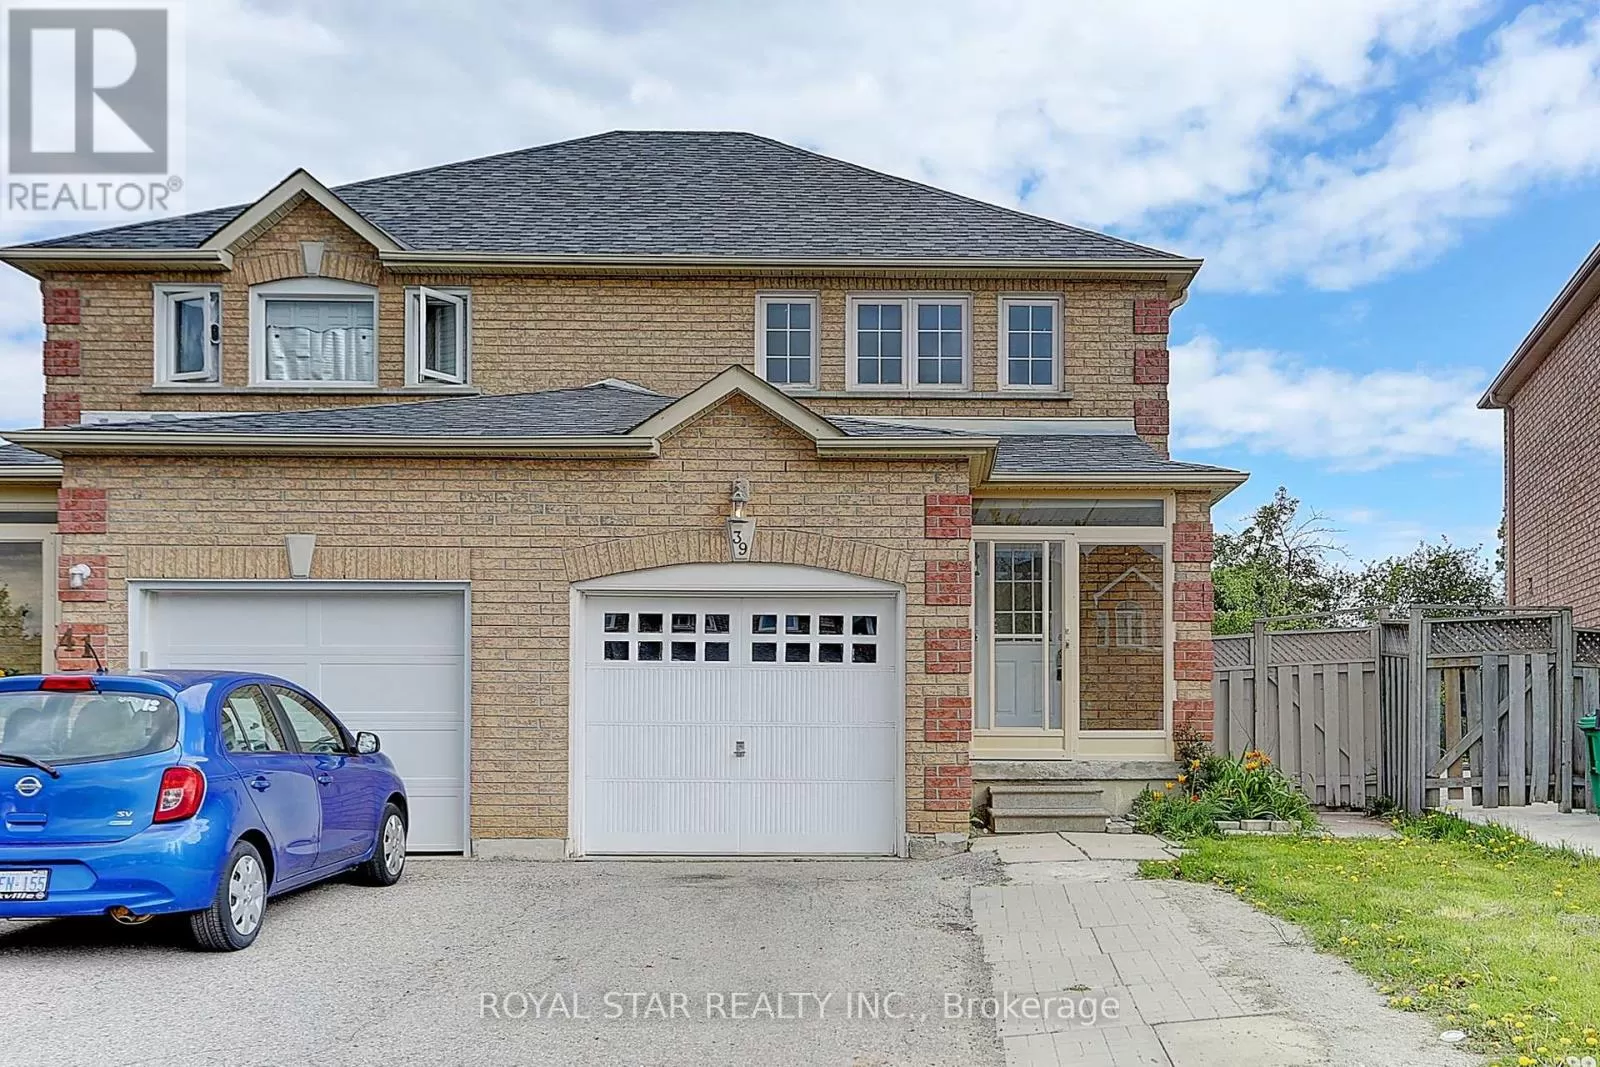 House for rent: 39 Caruso Drive, Brampton, Ontario L6Y 5B2